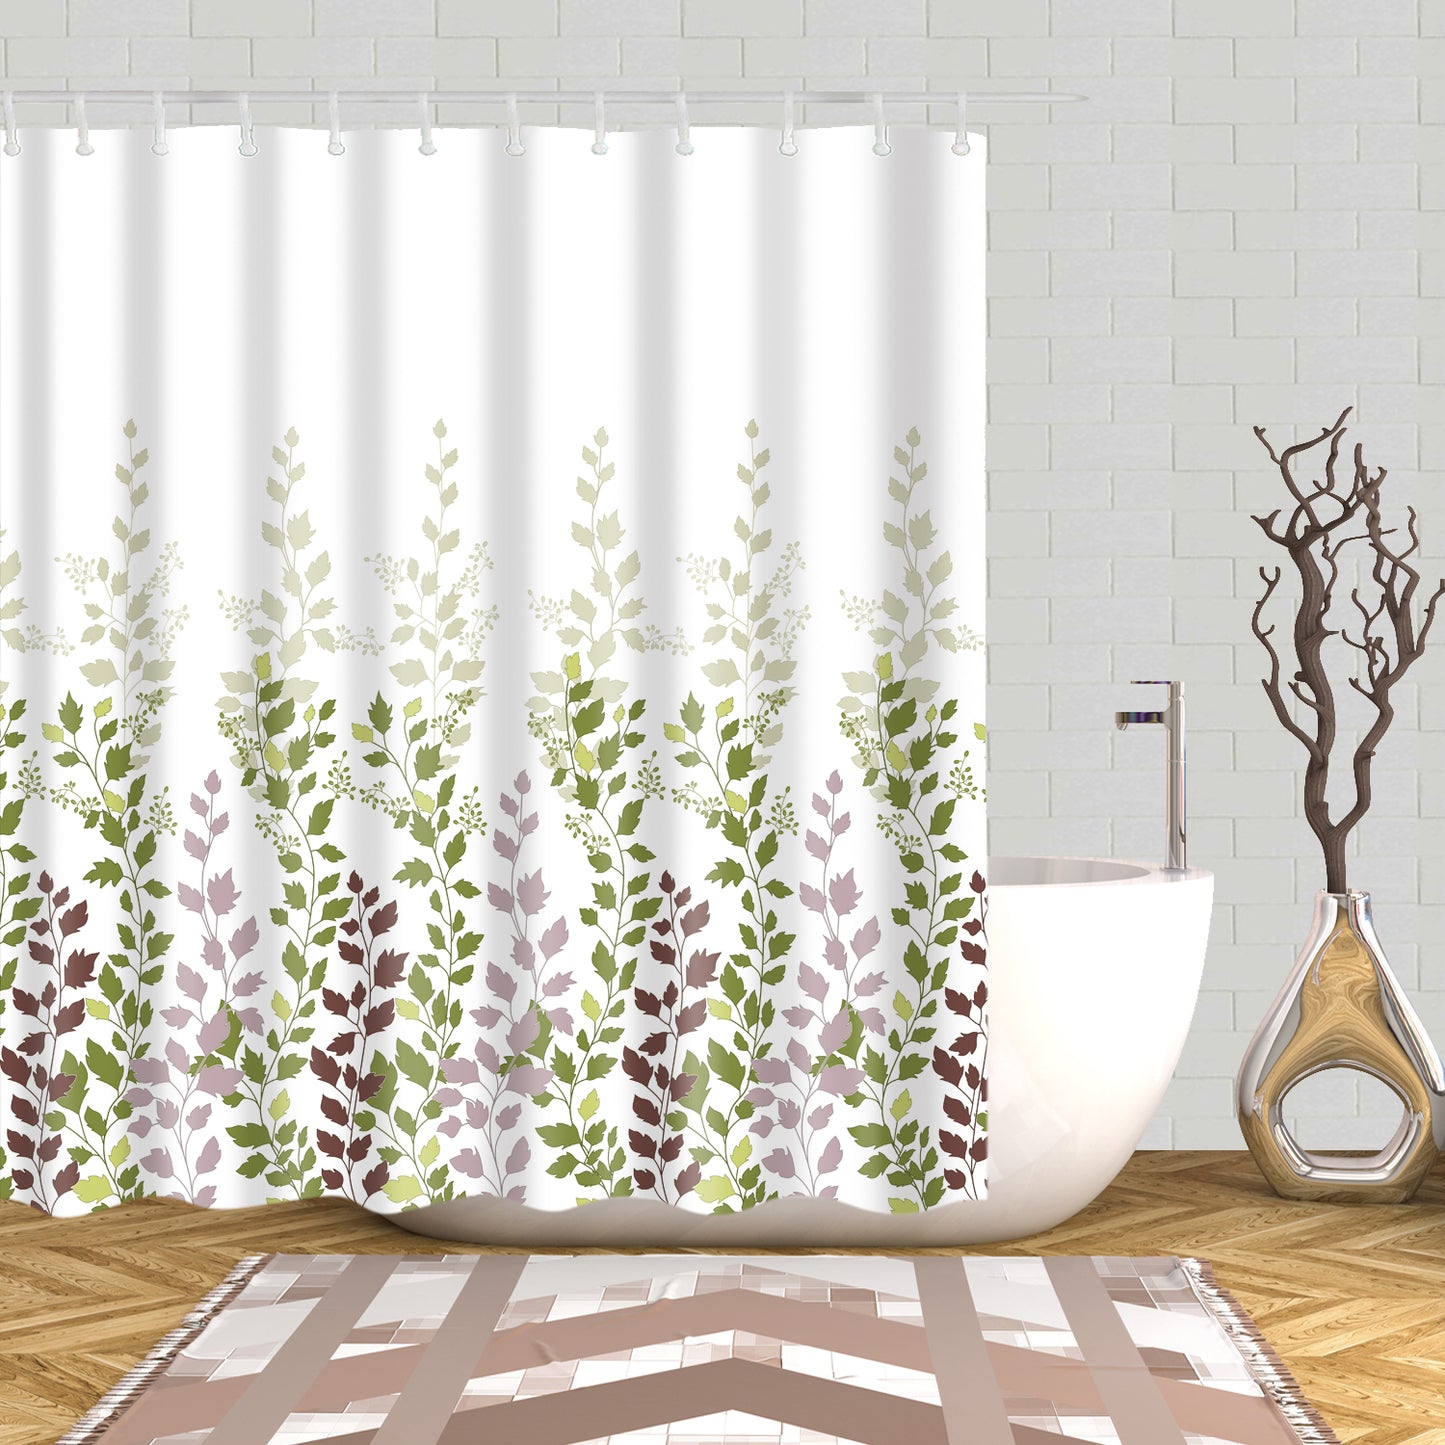 Green and Purple Growing Grass Shower Curtain